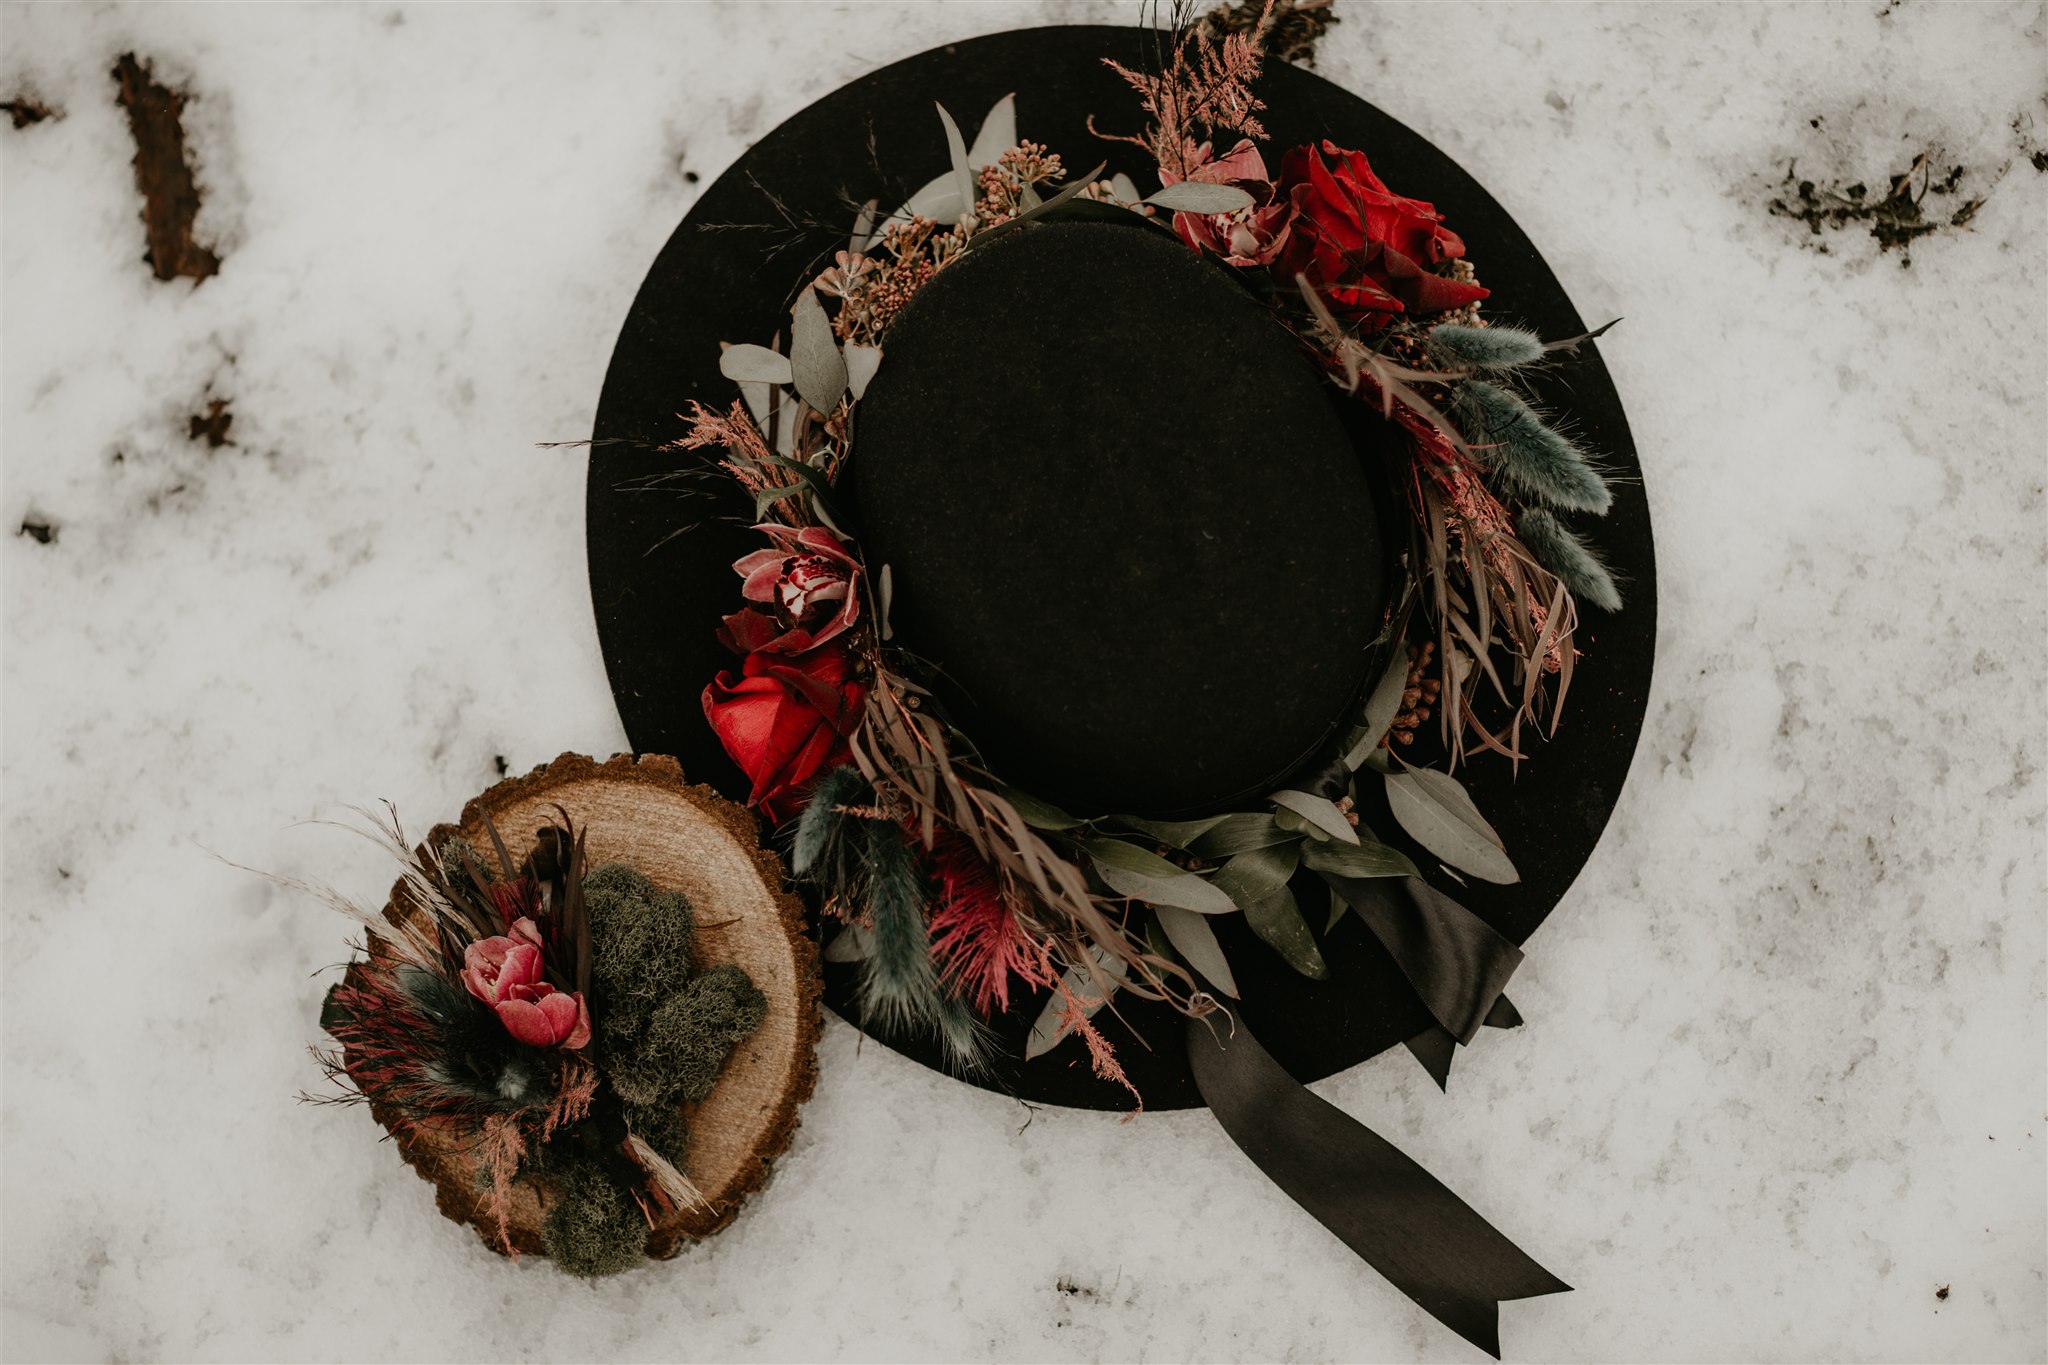 Black Wedding Hat with Sage and Red Garland on snow